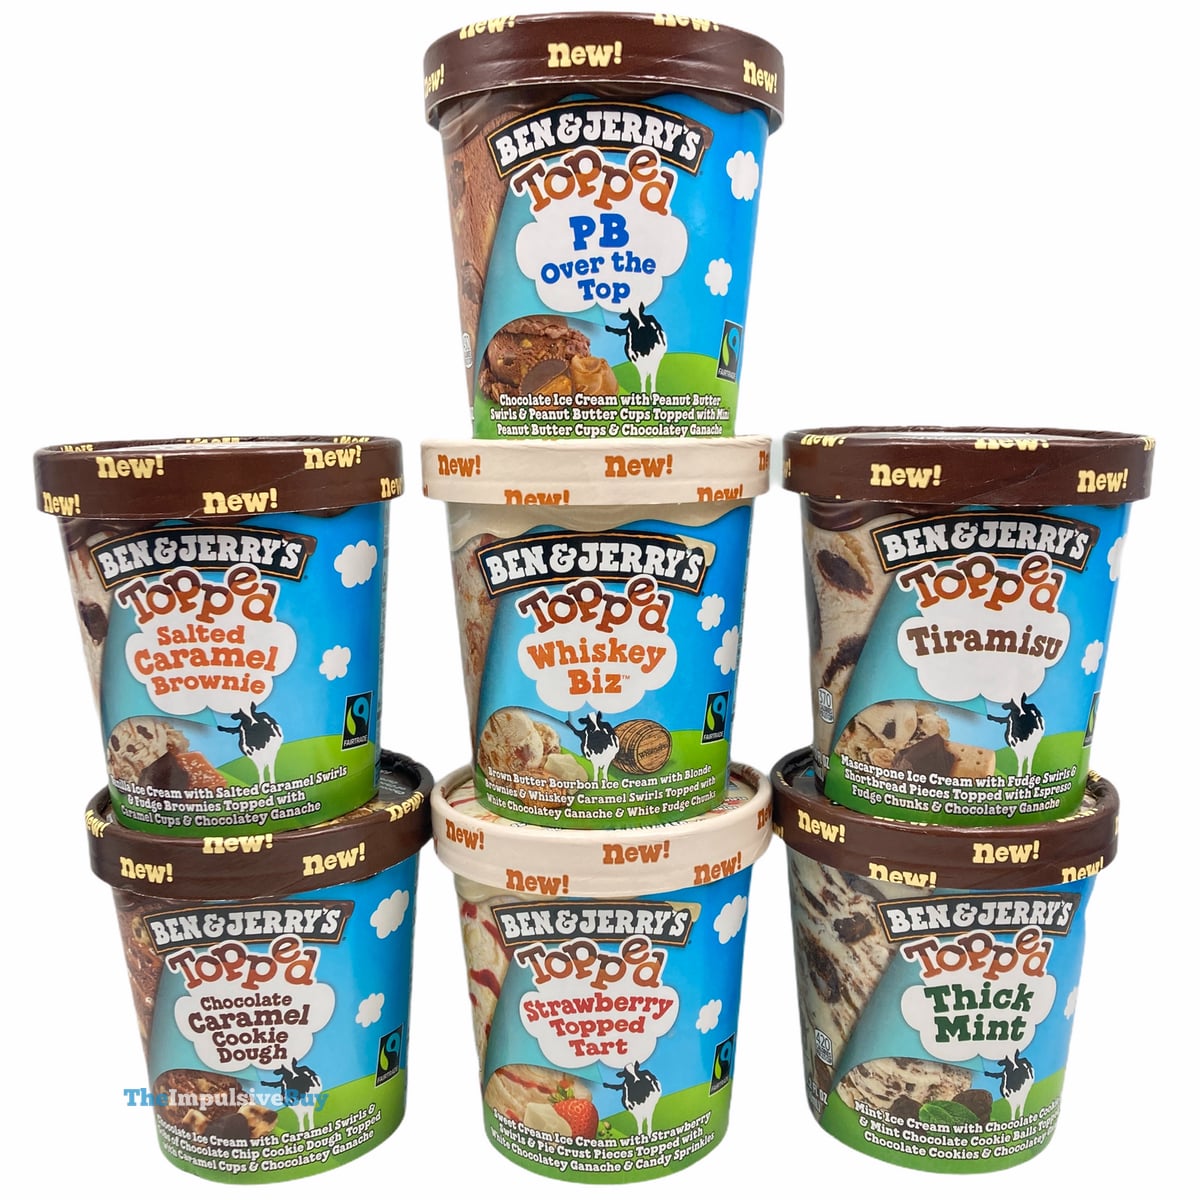 REVIEW Ben & Jerry's Topped Ice Cream The Impulsive Buy